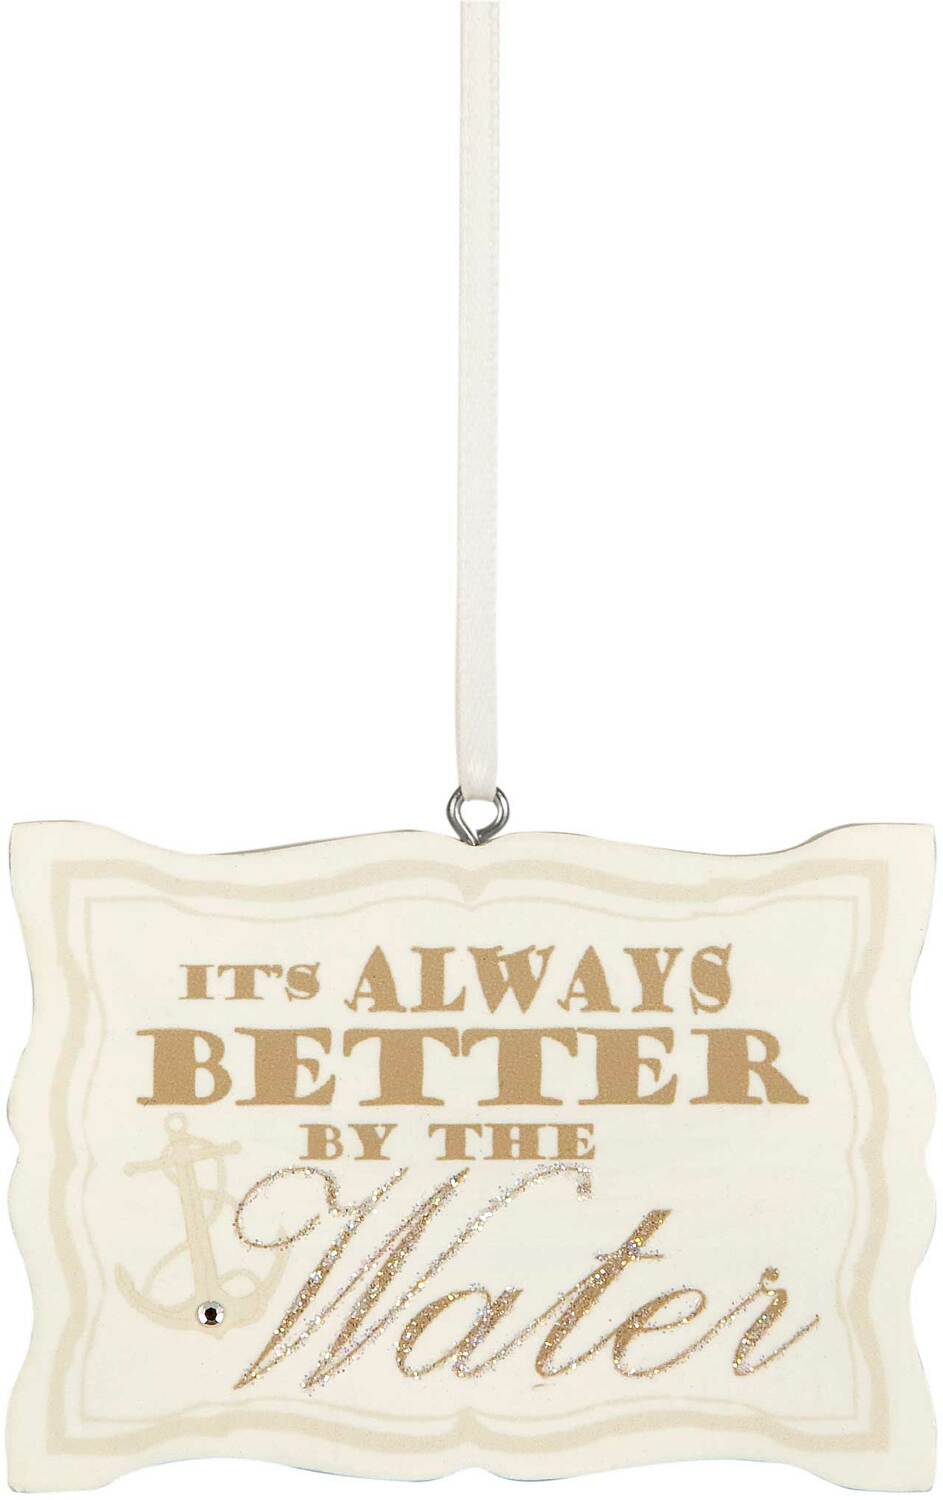 By the Water by Signs of Happiness - By the Water - 3" x 2" Hanging Plaque